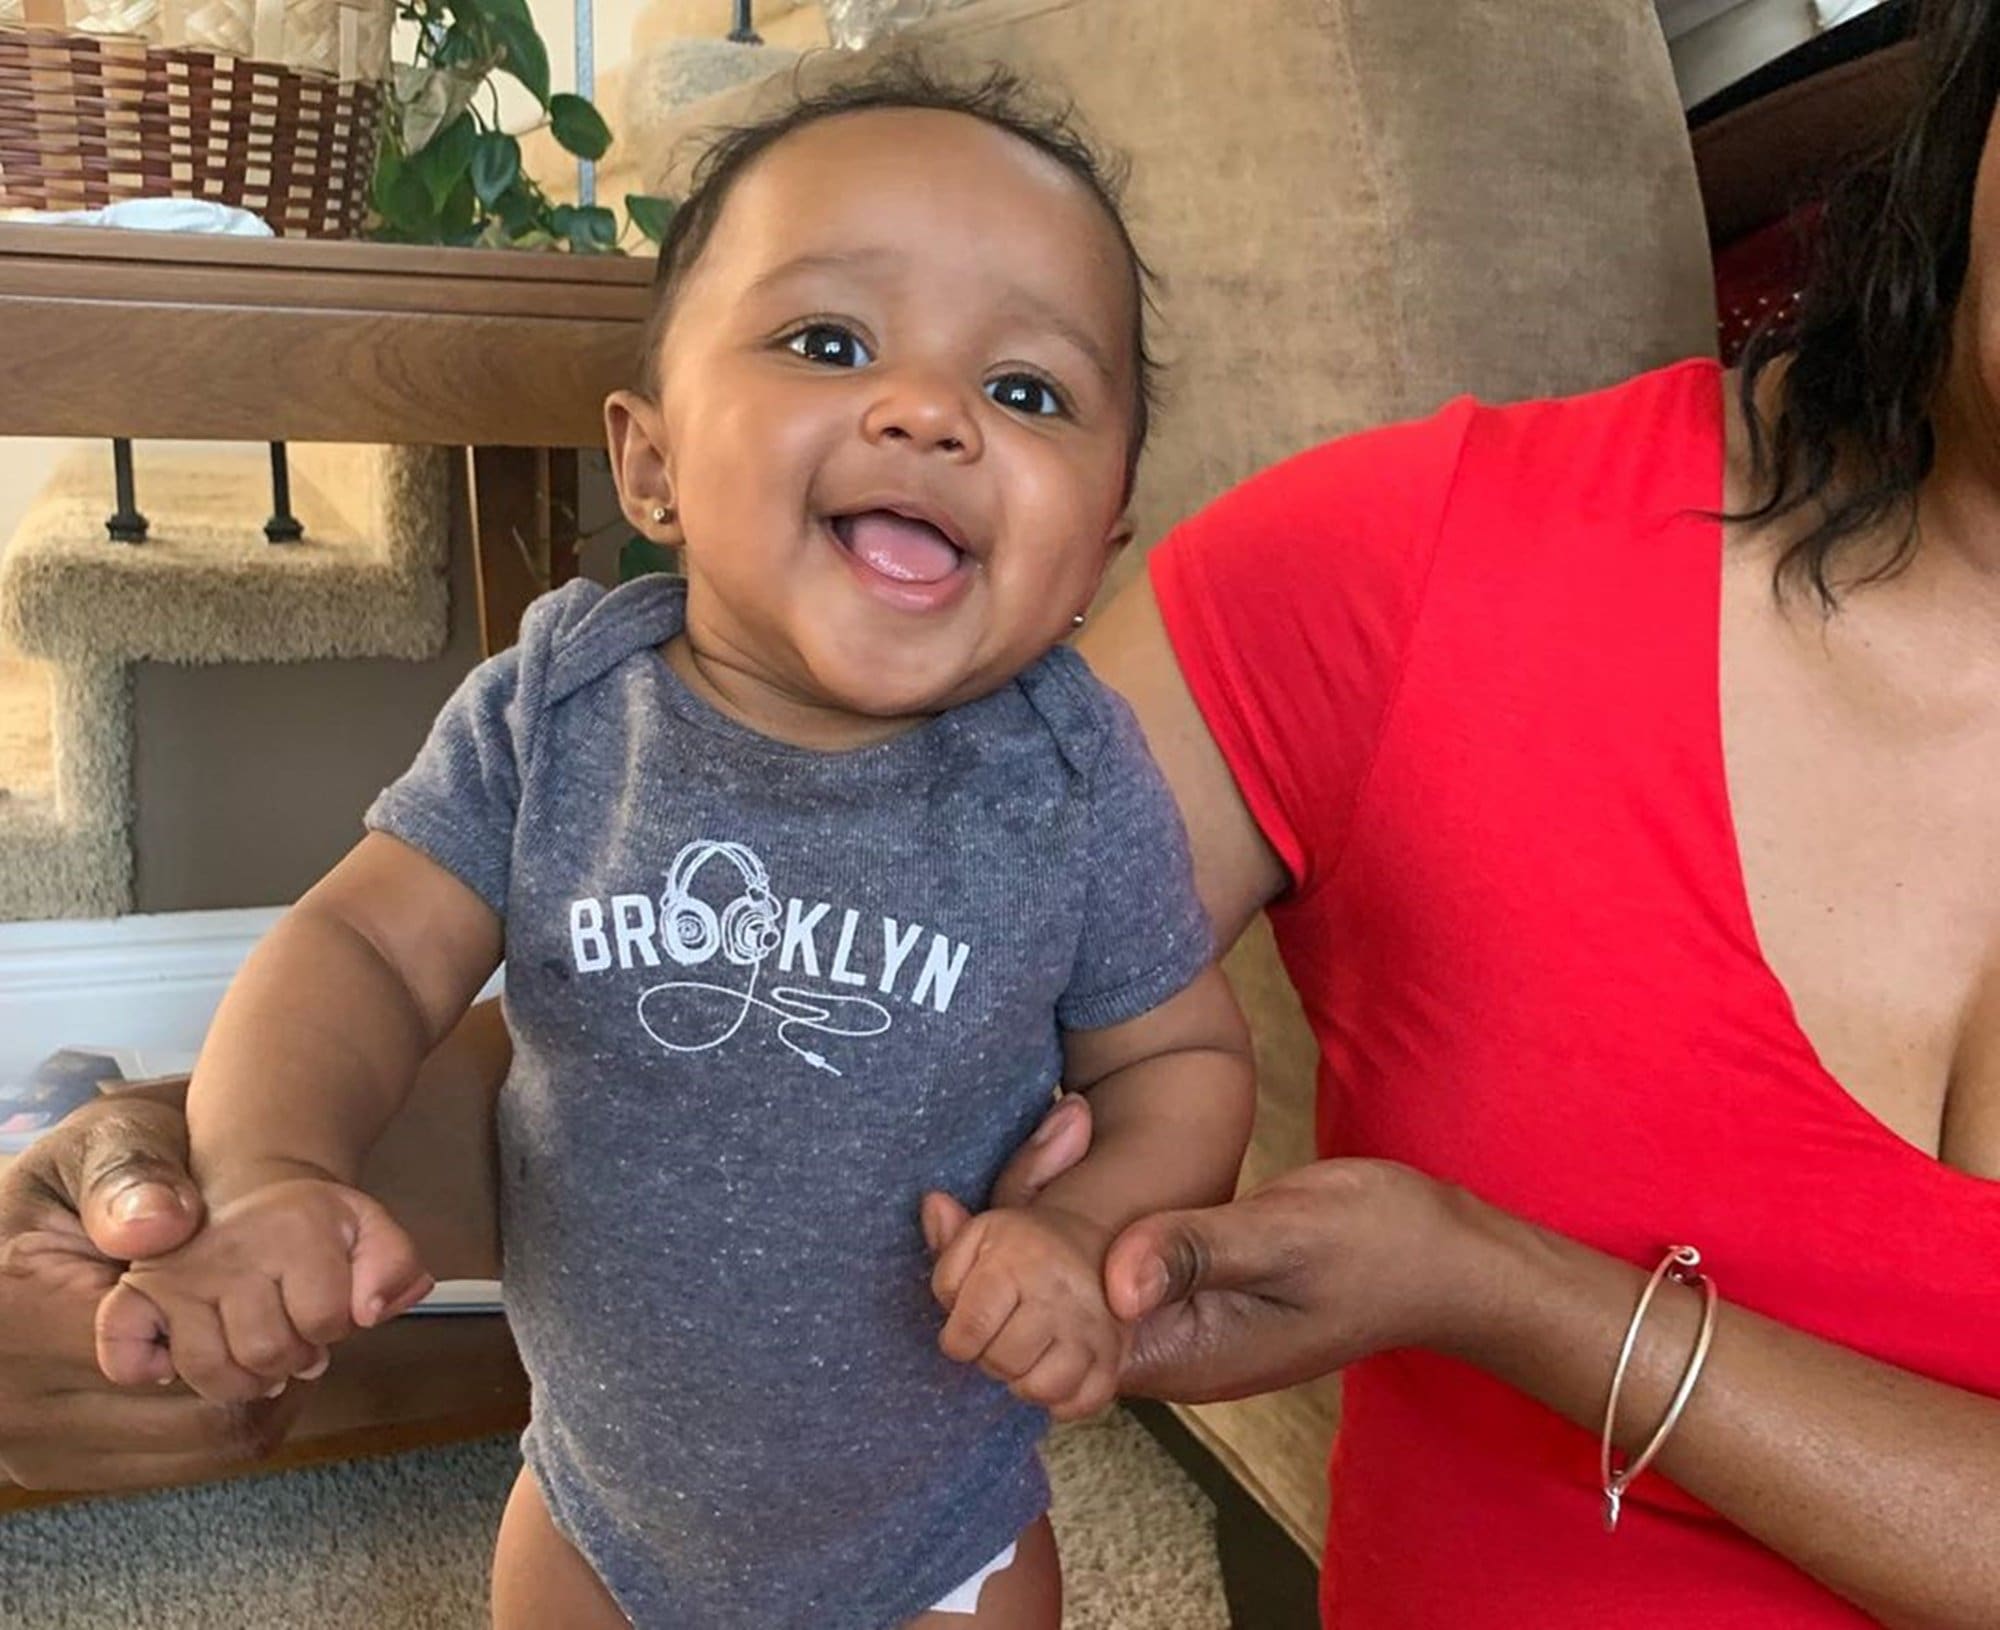 ”kenya-moore-shares-some-morning-giggles-from-her-daughter-brooklyn-see-the-video”